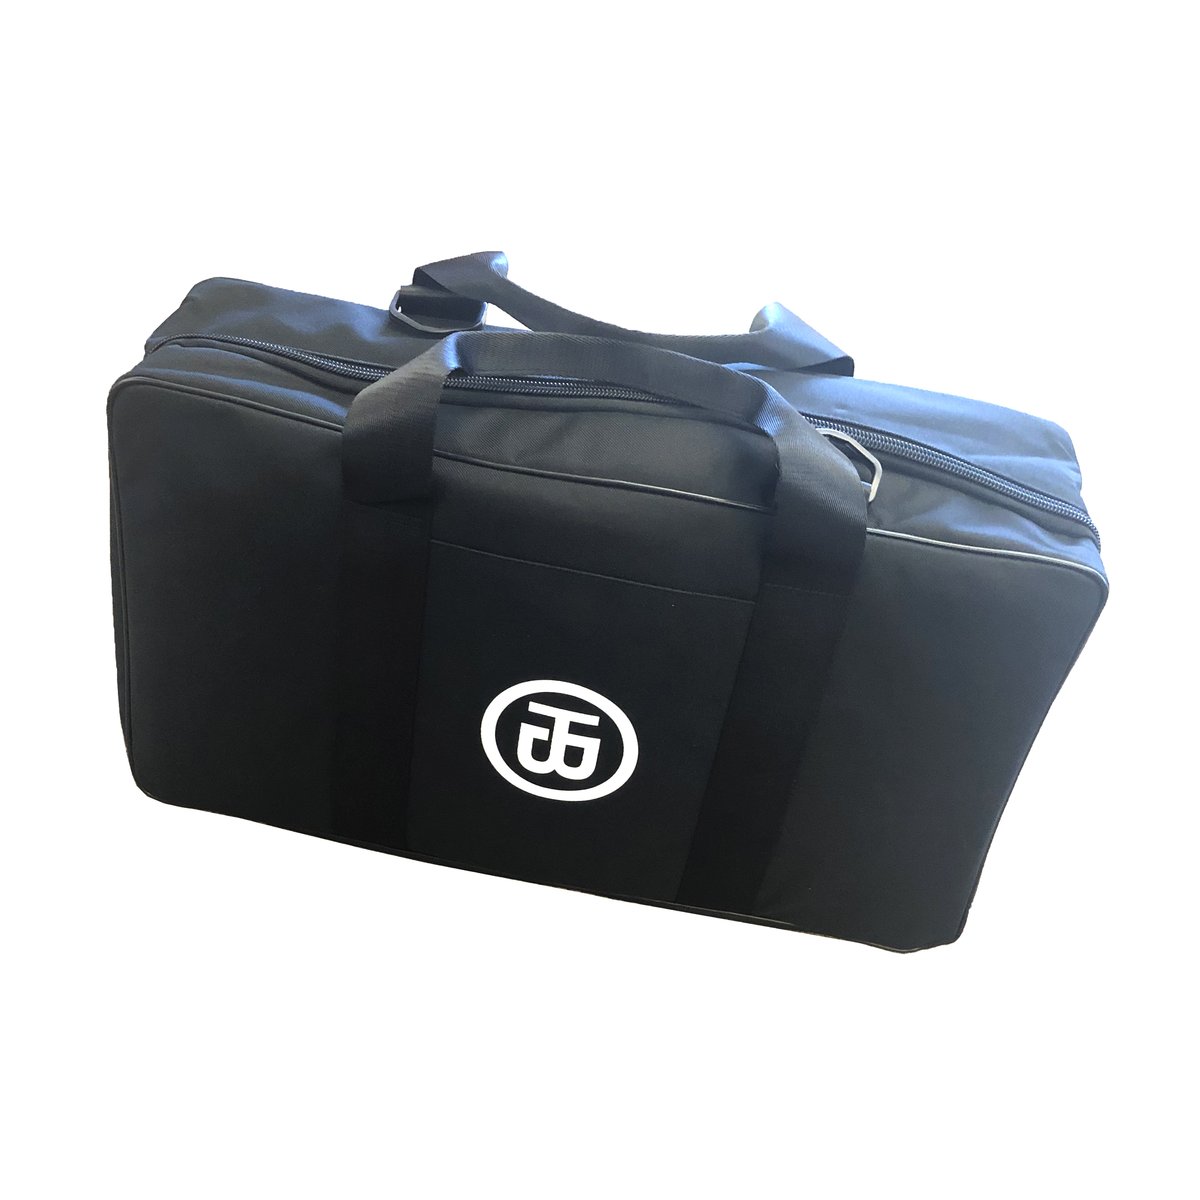 Carrying Case for Sahara Dehydrator - Brod & Taylor